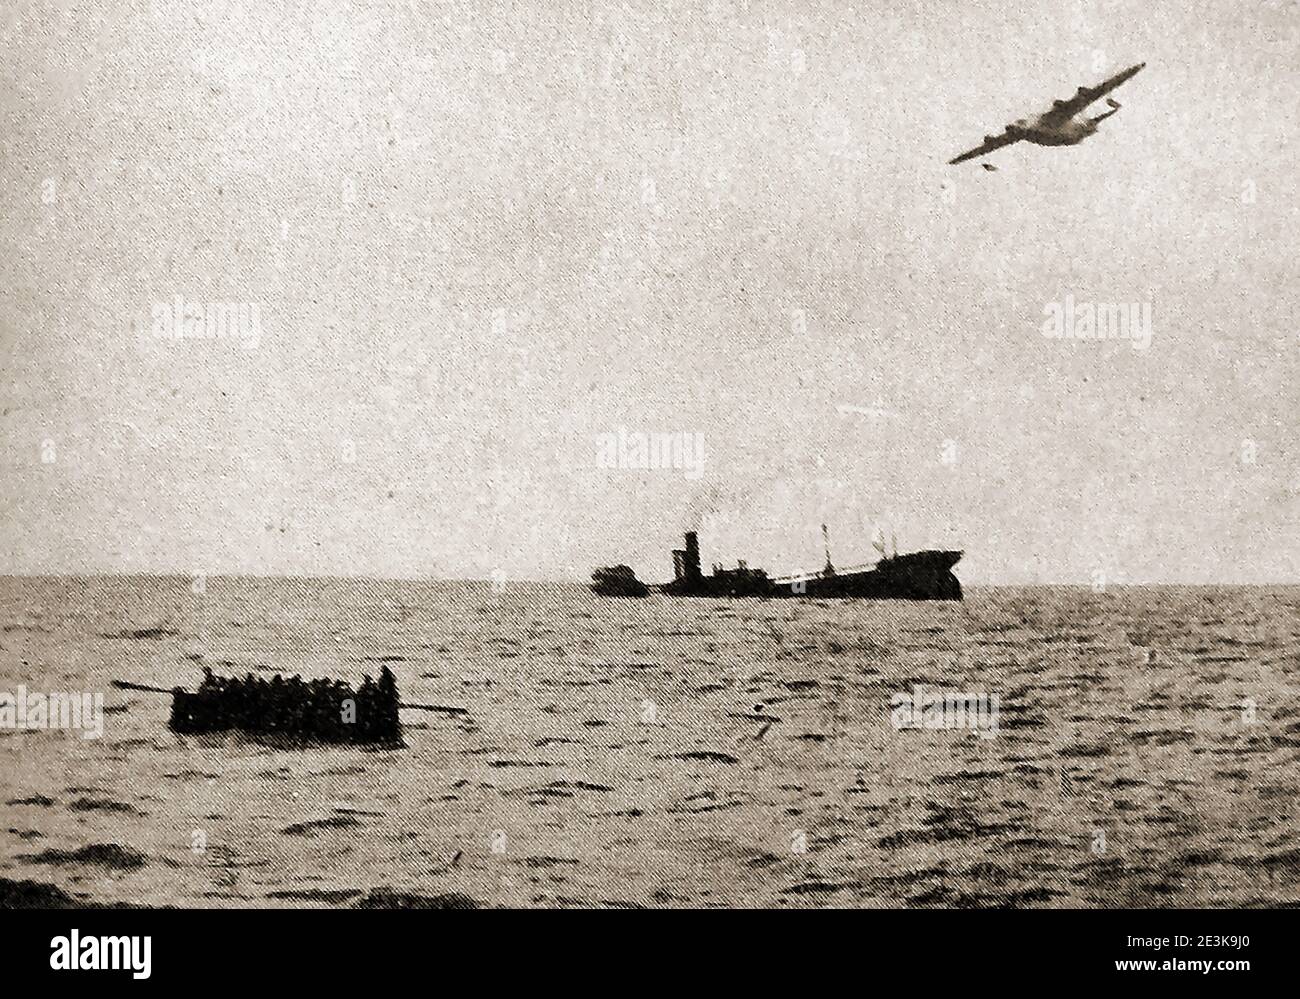 WWII - The sinking of the torpedoed British 'Kensington Court' in the Atlantic. All crew were saved -  (An RAF flying boat can be seen flying overhead) .The Steam merchant had a 4,863 tonnage. She was  completed in 1927,  built by  Napier & Miller Ltd, Old Kilpatrick, Glasgow.  Owner was Court Line Ltd (Haldin & Philipps Ltd), London (Attacked 18th September 1939 near Land's End, UK by U2-32. - 0 dead - 35 survivors - carrying a cargo of cereals - Master  was Joseph Schofield) Stock Photo